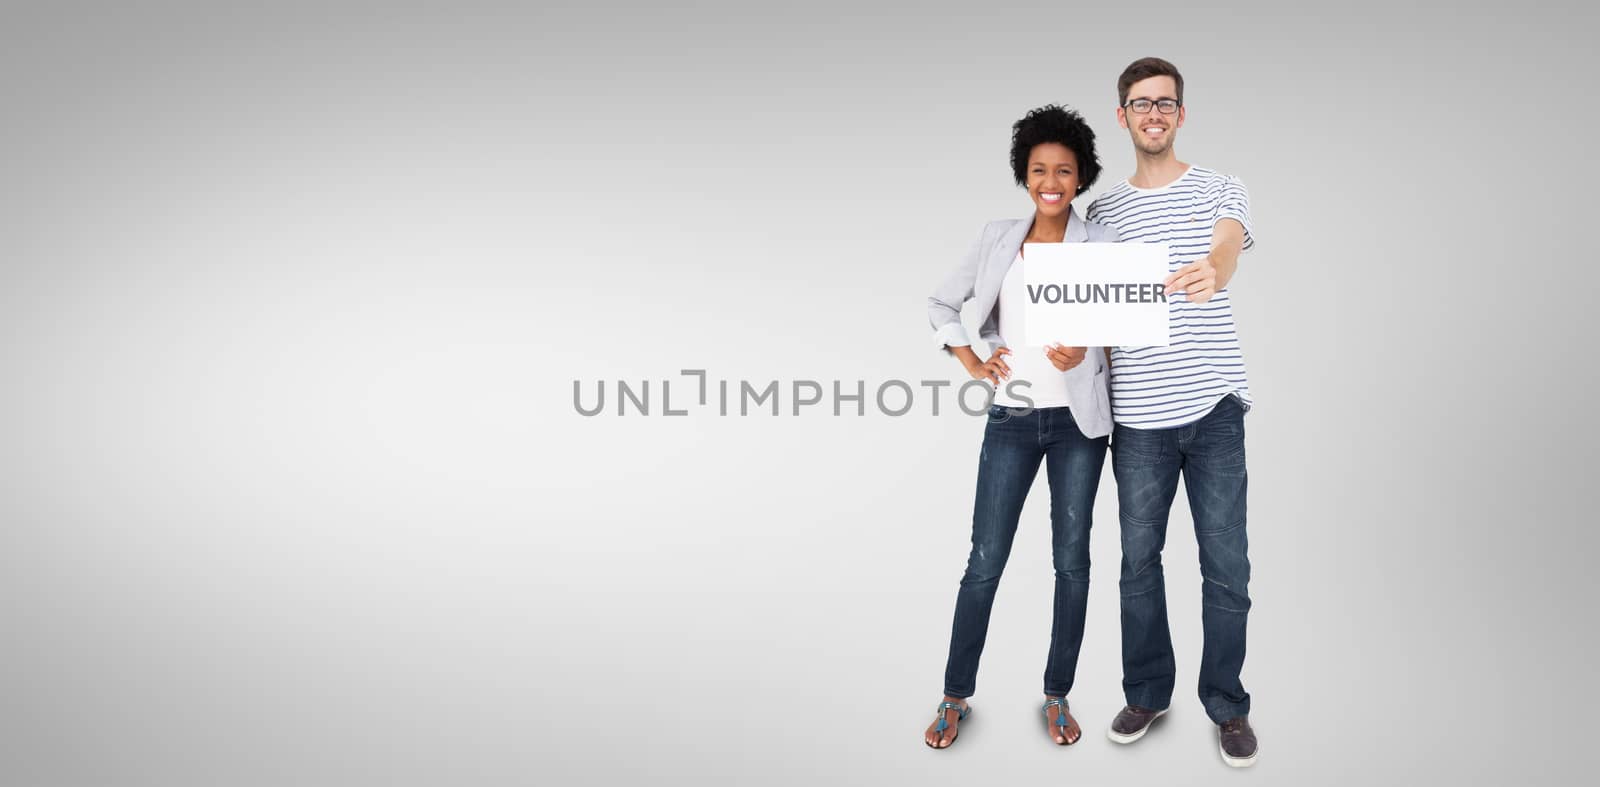 Portrait of a happy couple holding a volunteer note against grey vignette